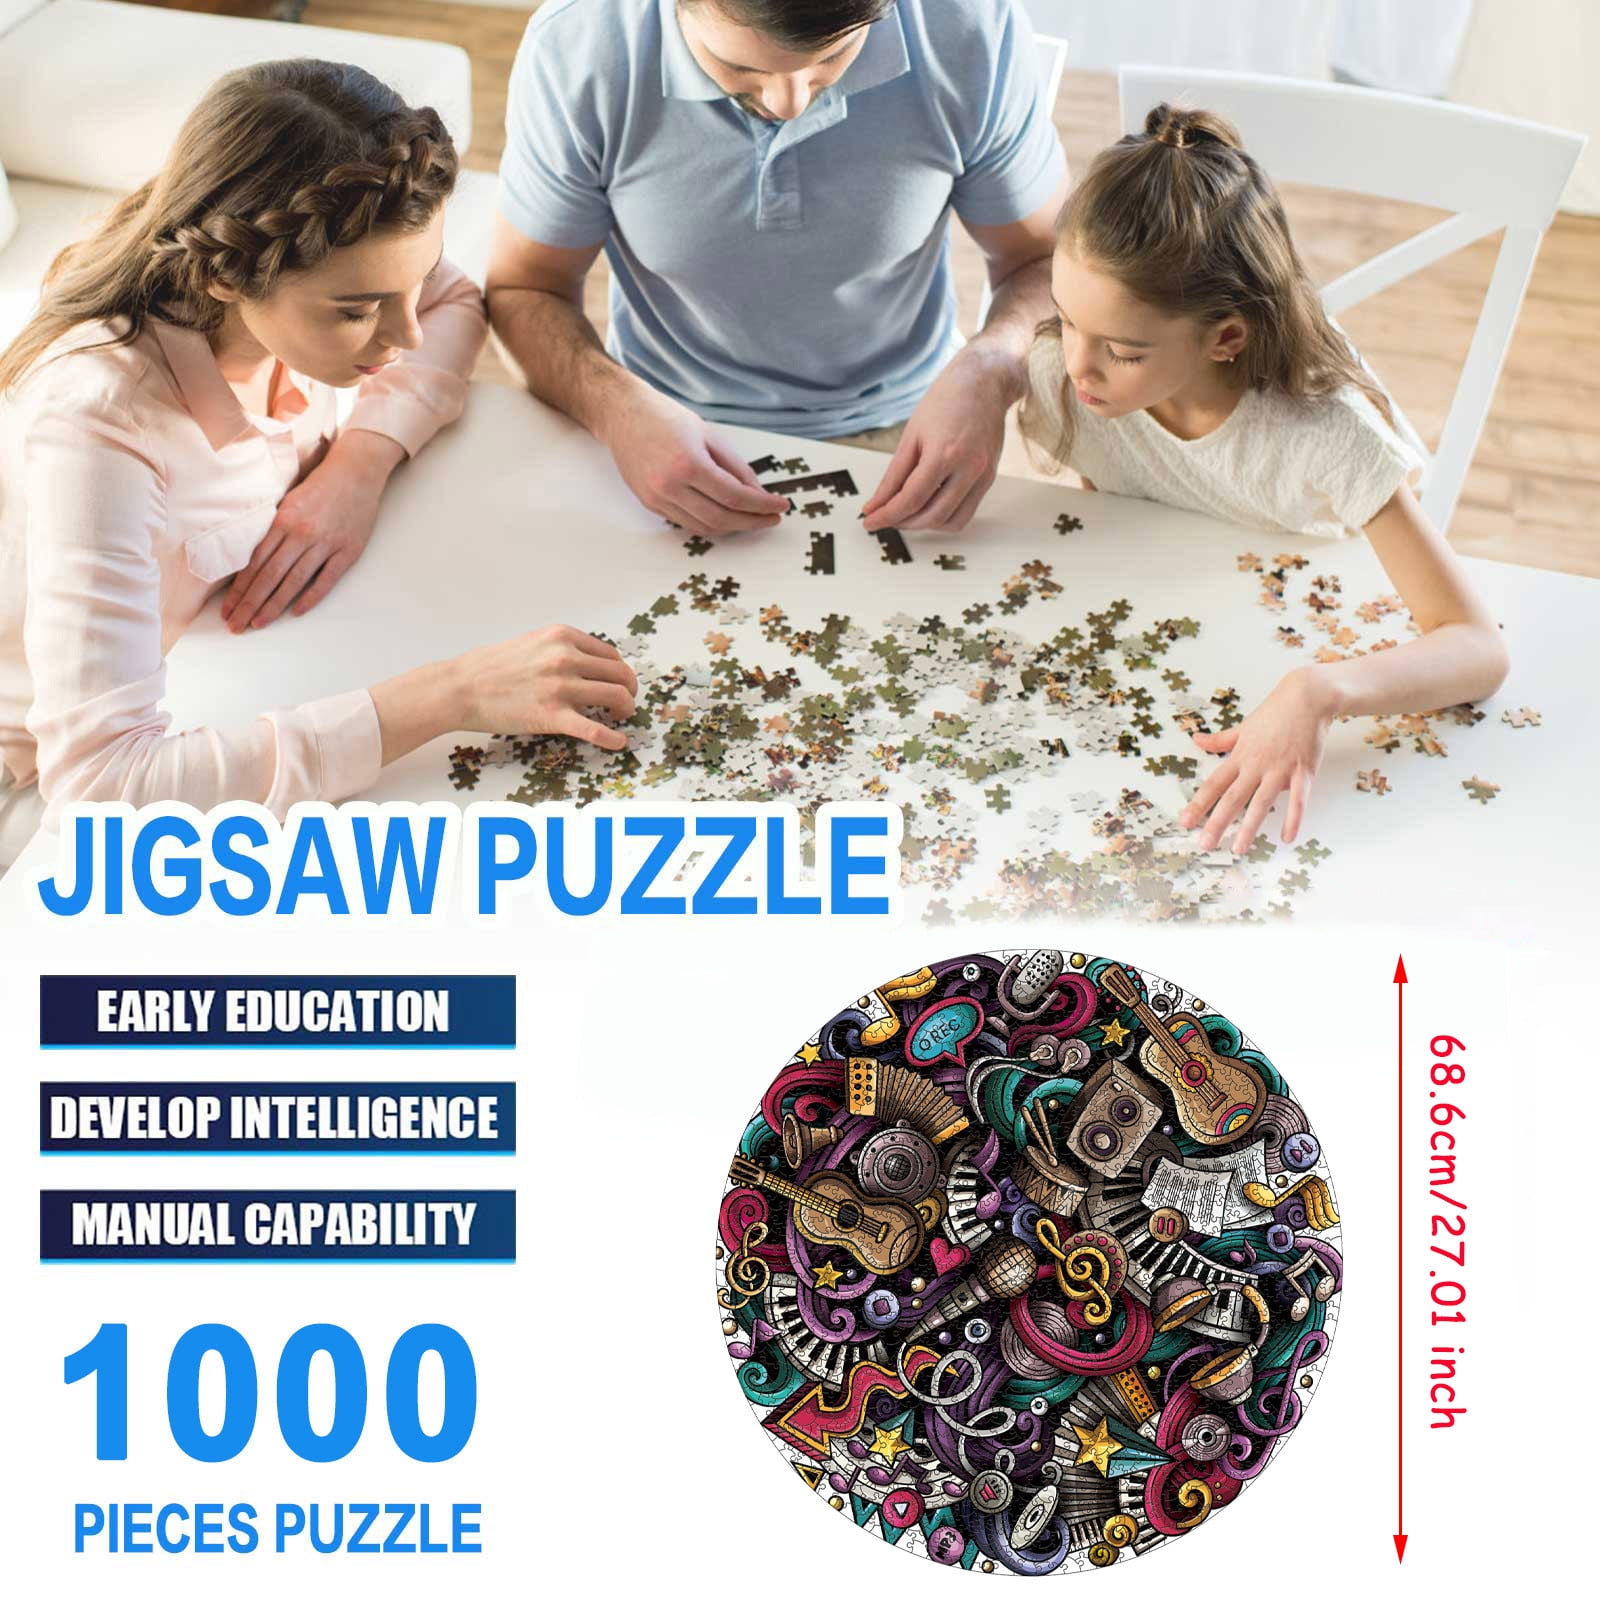 4000 Pieces Wooden Animal Puzzle for Adults-Beautiful sea Turtle-Adults Jigsaw Puzzles Large Puzzle Game Artwork for Adults Teens Educational Games Toys Gift